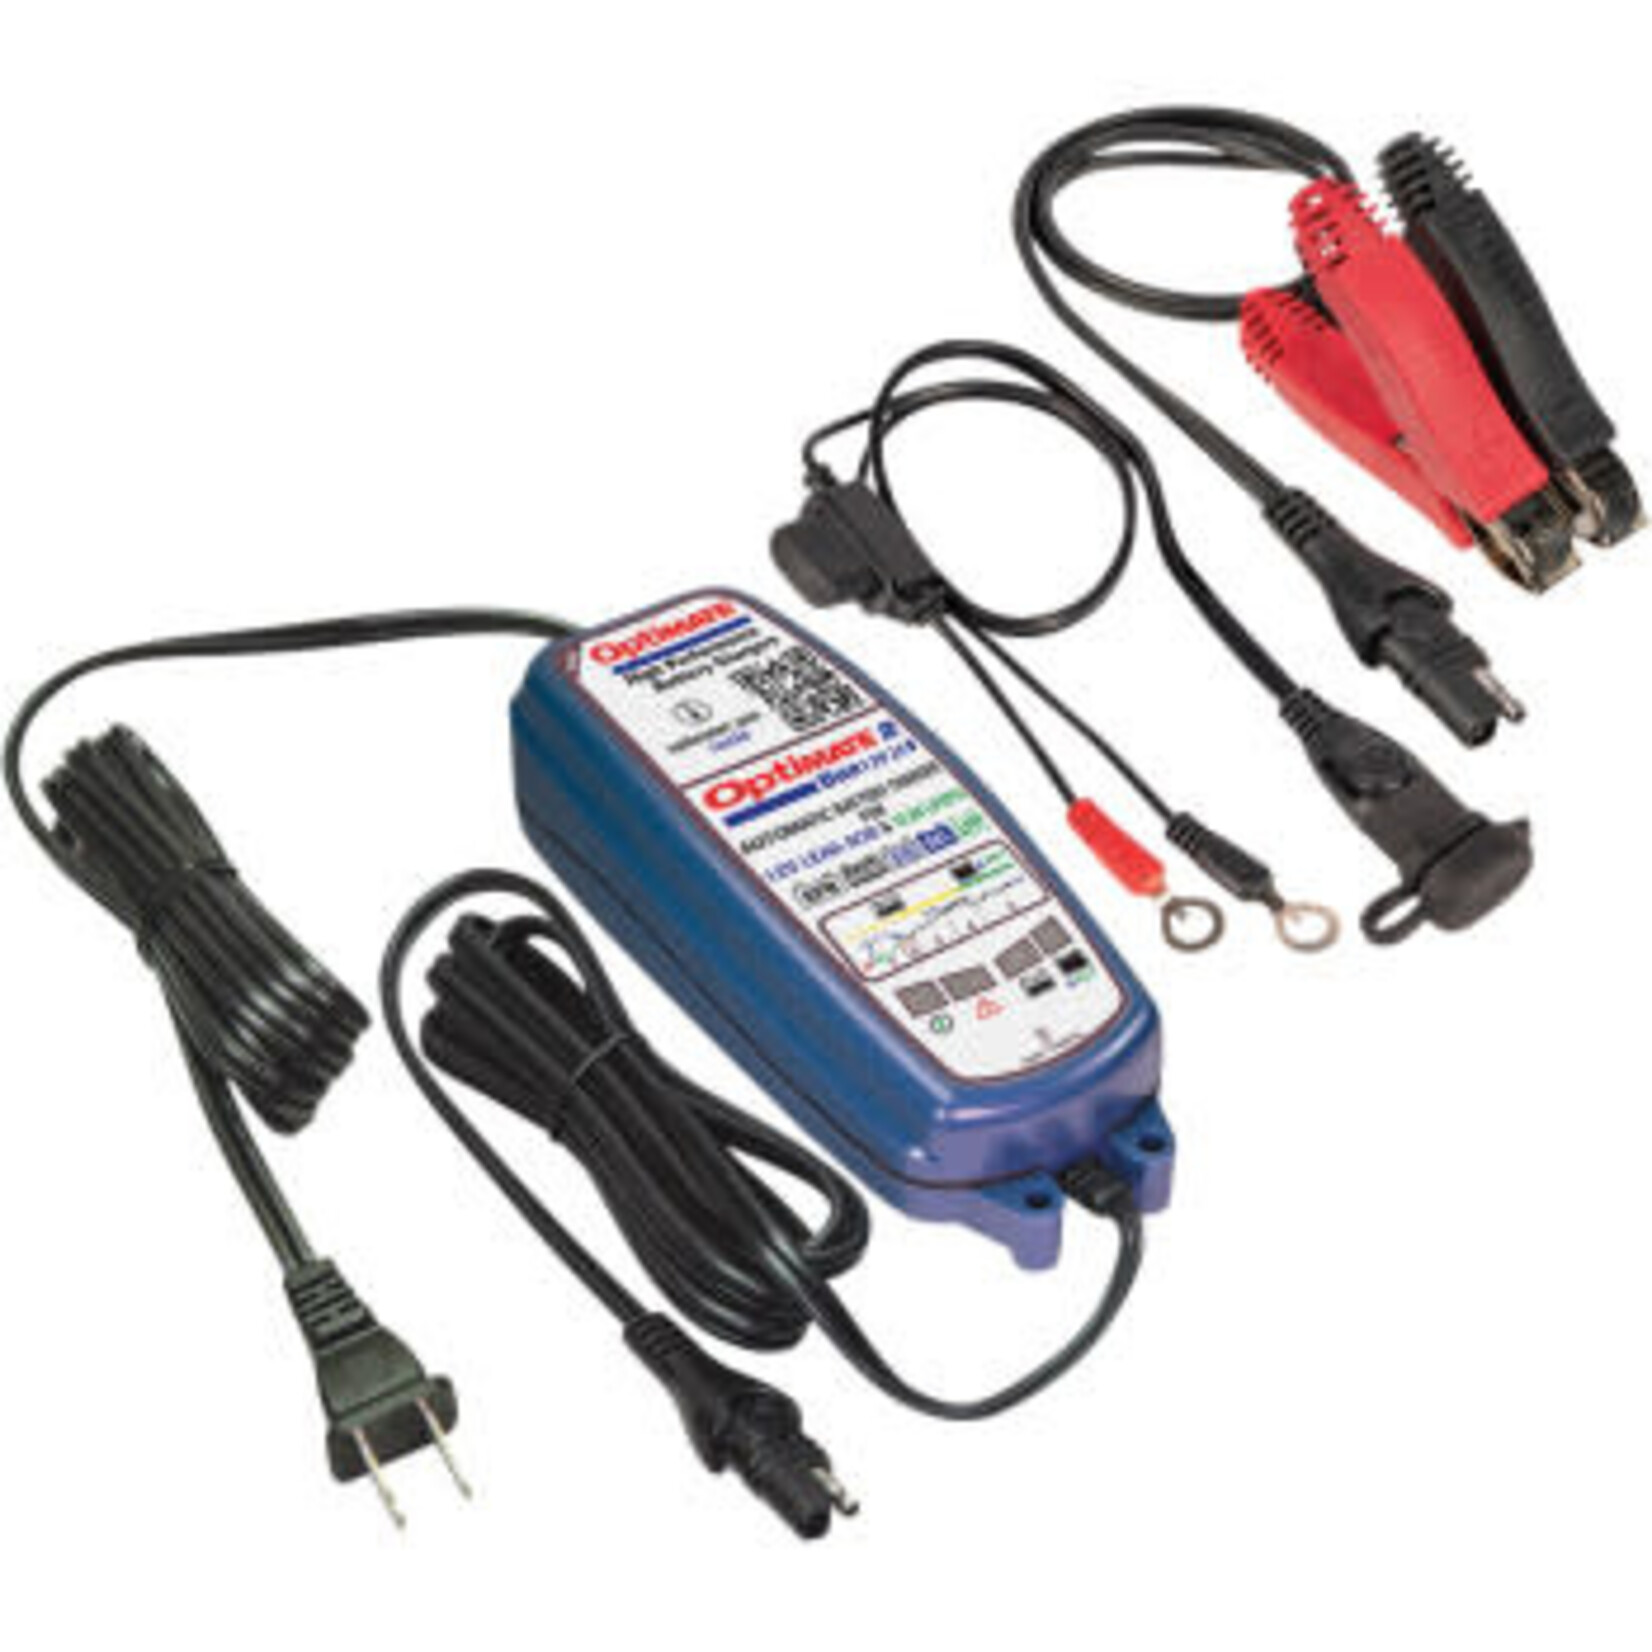 OPTIMATE 2 DUO 12V 2A CHARGER